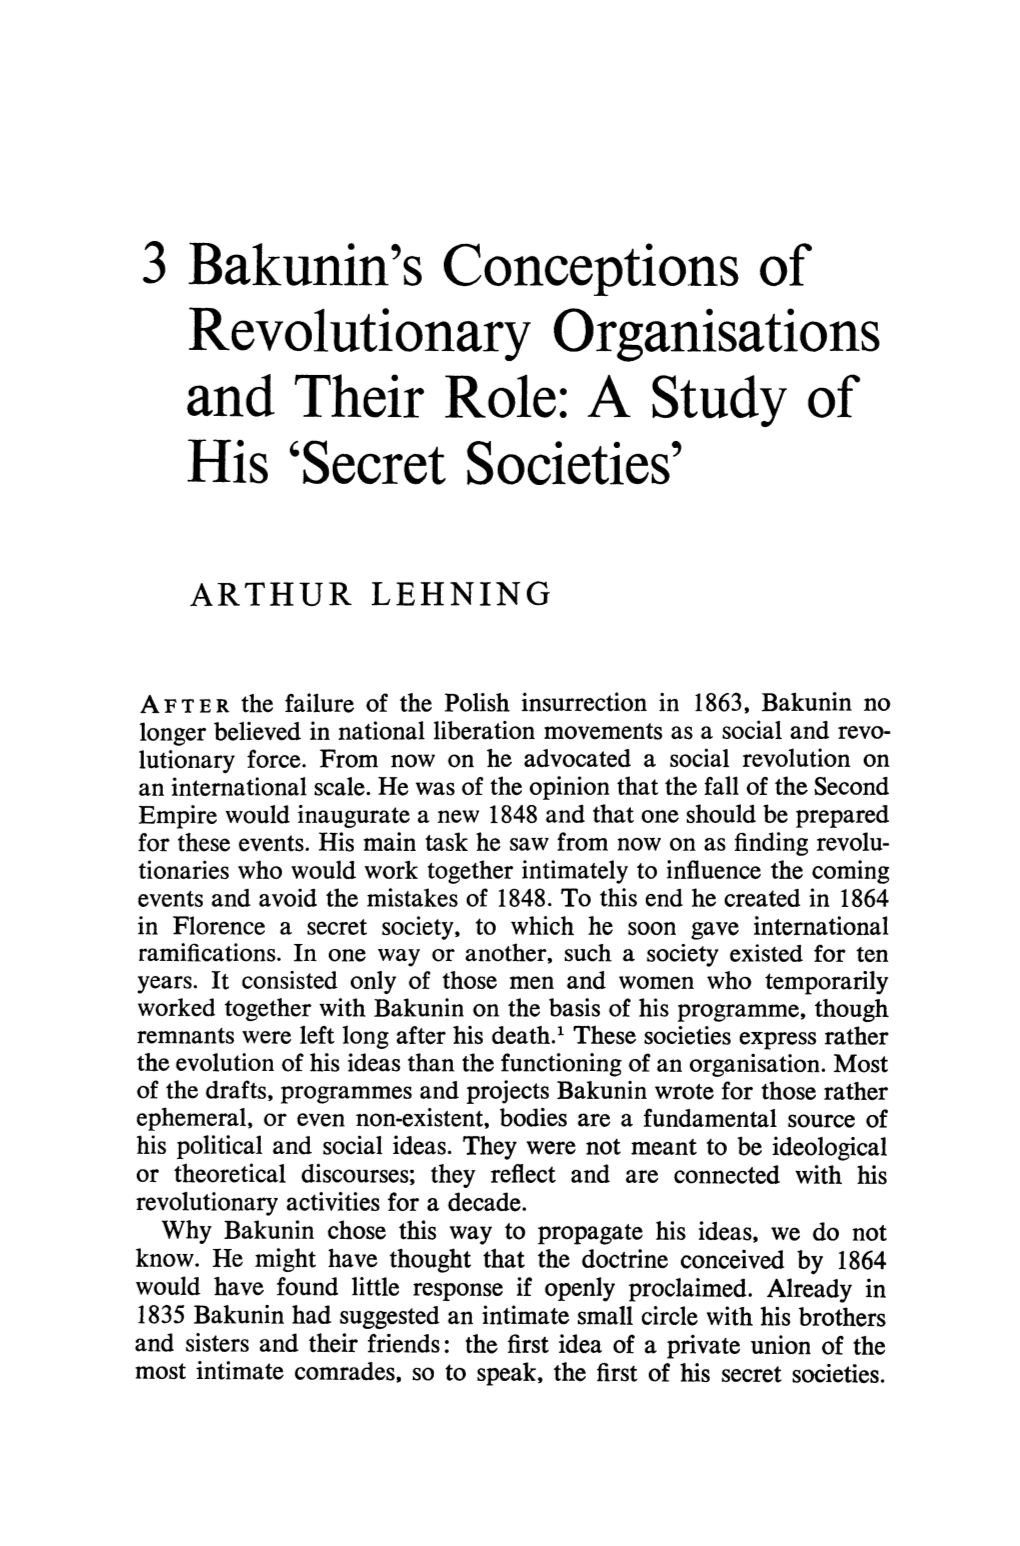 3 Bakunin's Conceptions of Revolutionary Organisations and Their Role: a Study of His 'Secret Societies'